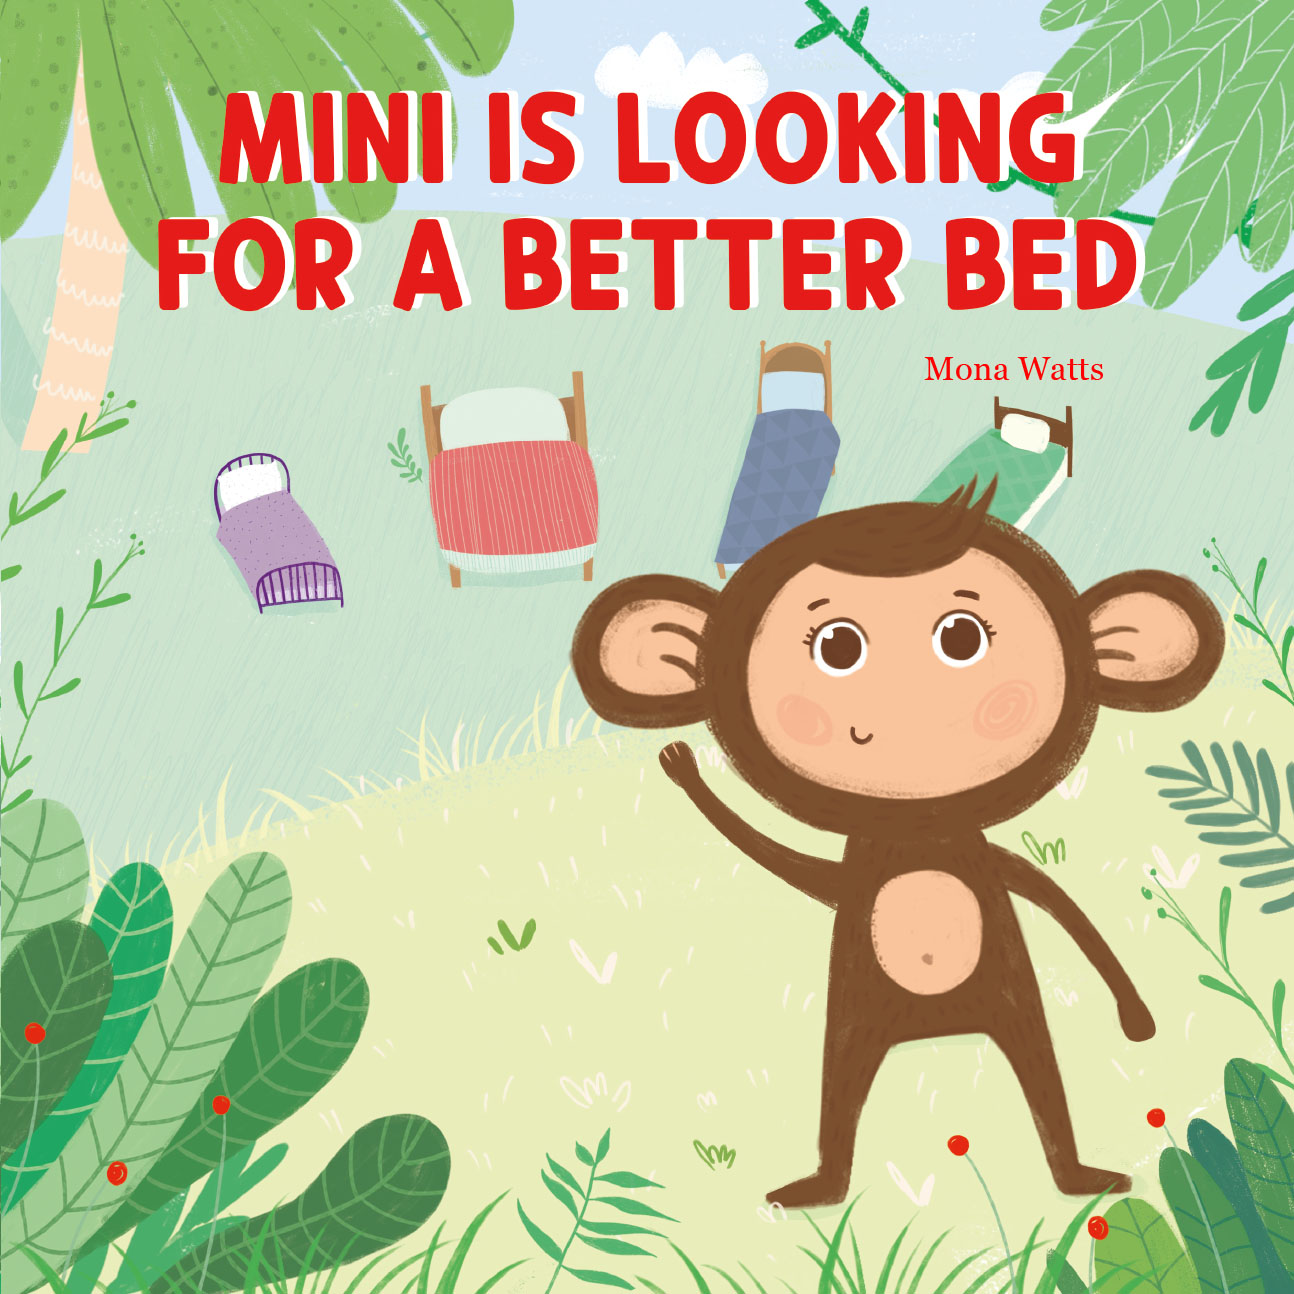 FREE: Mini is looking for a better bed by Mona Watts